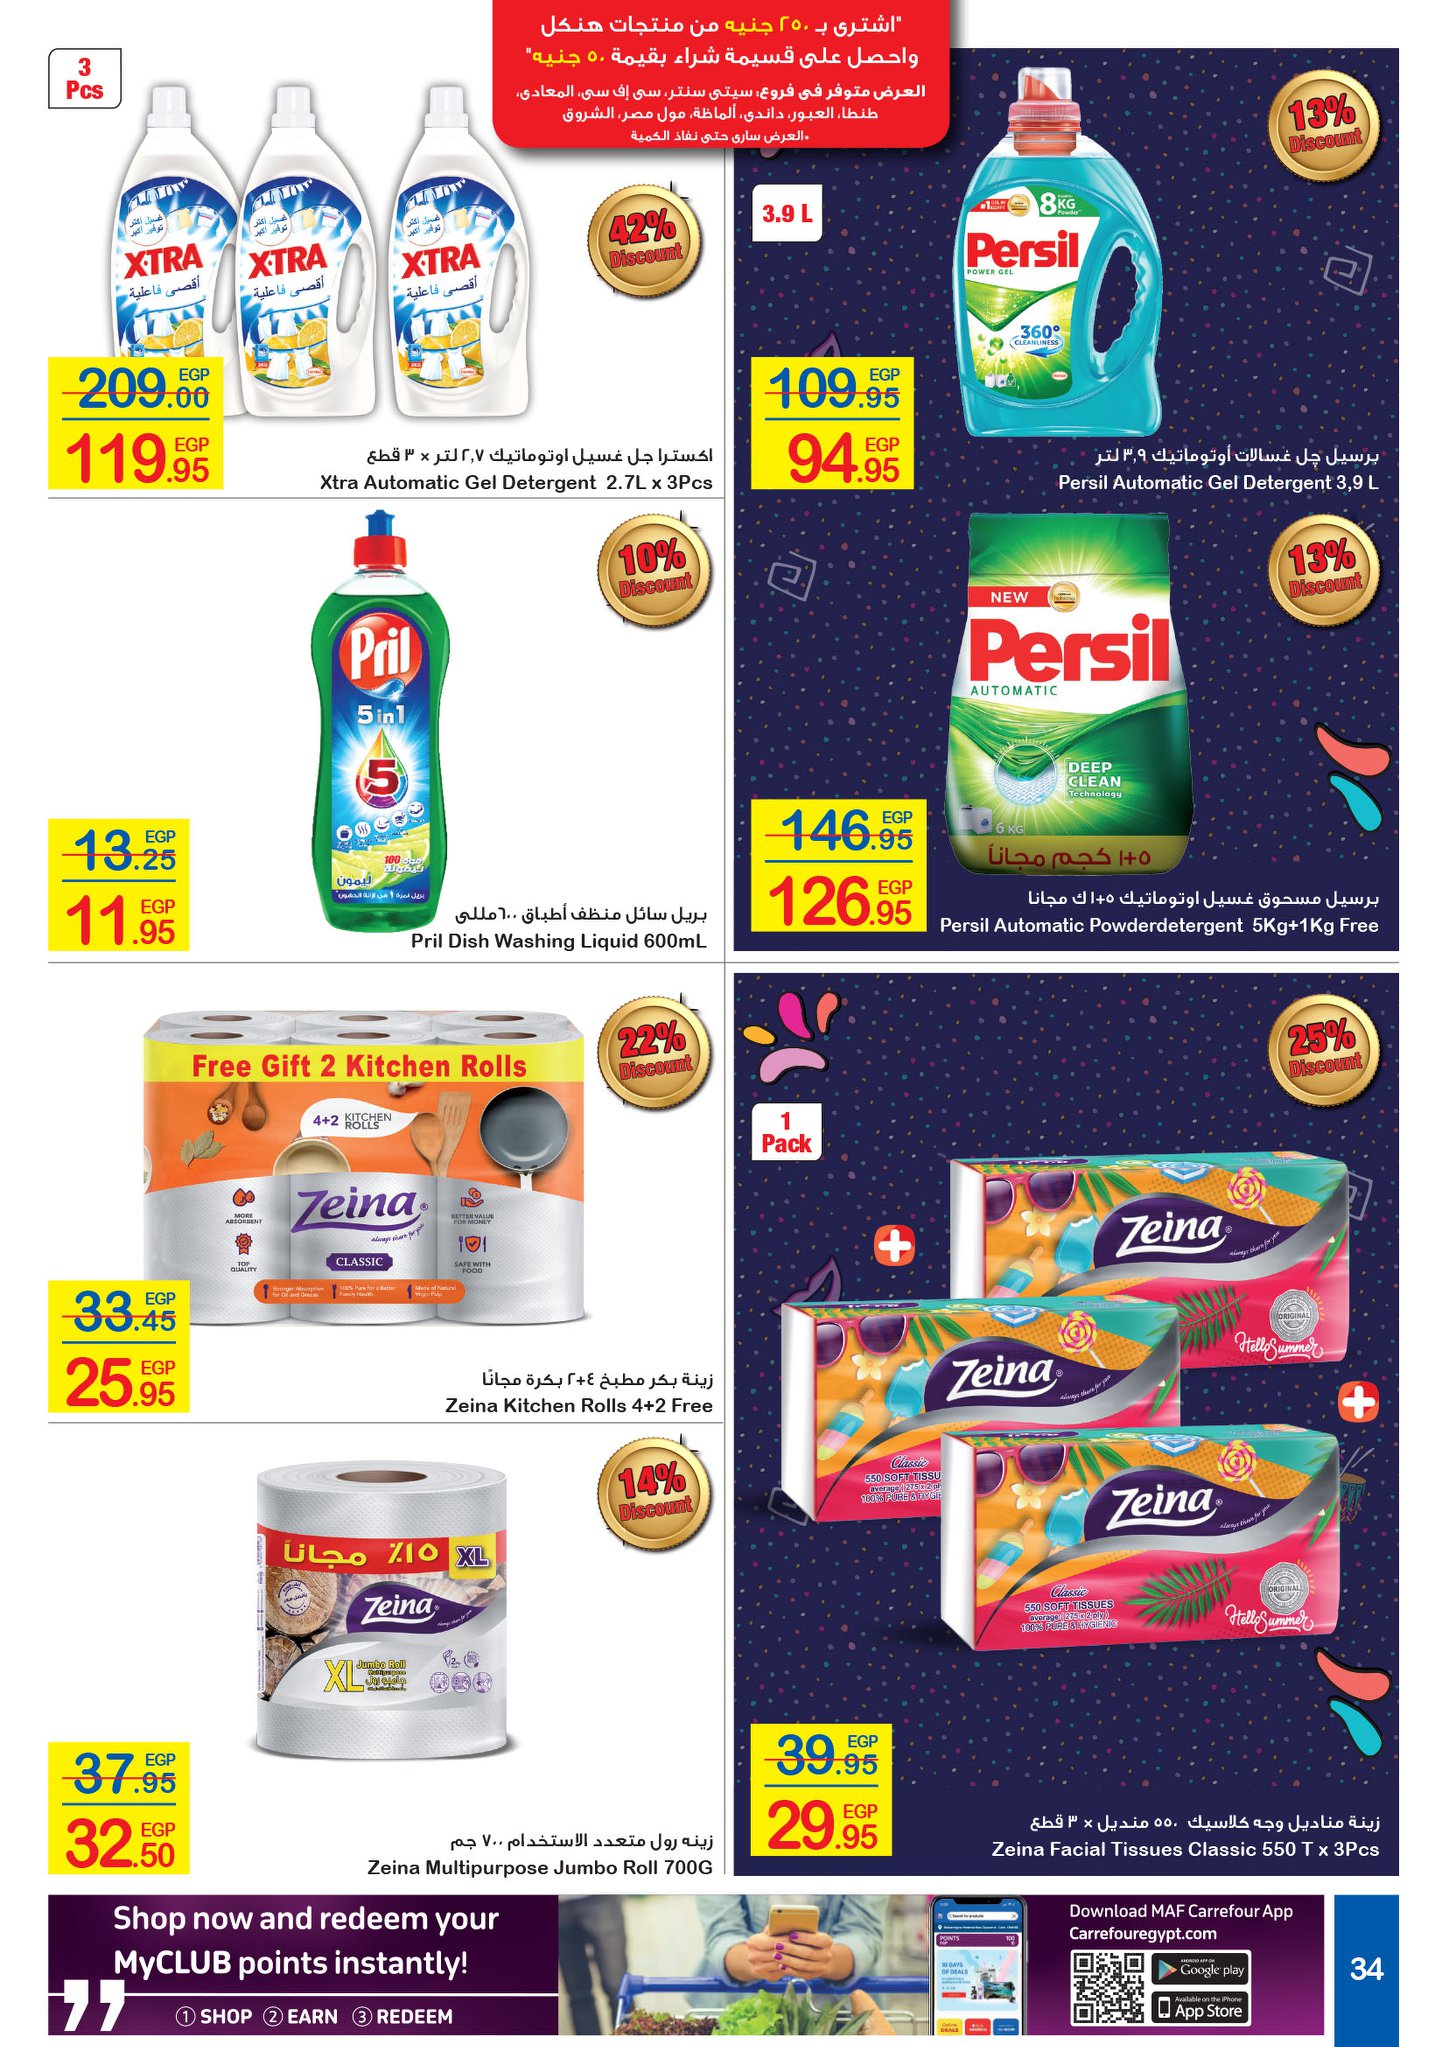 Carrefour Flyer from 16/7 till 27/7 | Carrefour Egypt 33